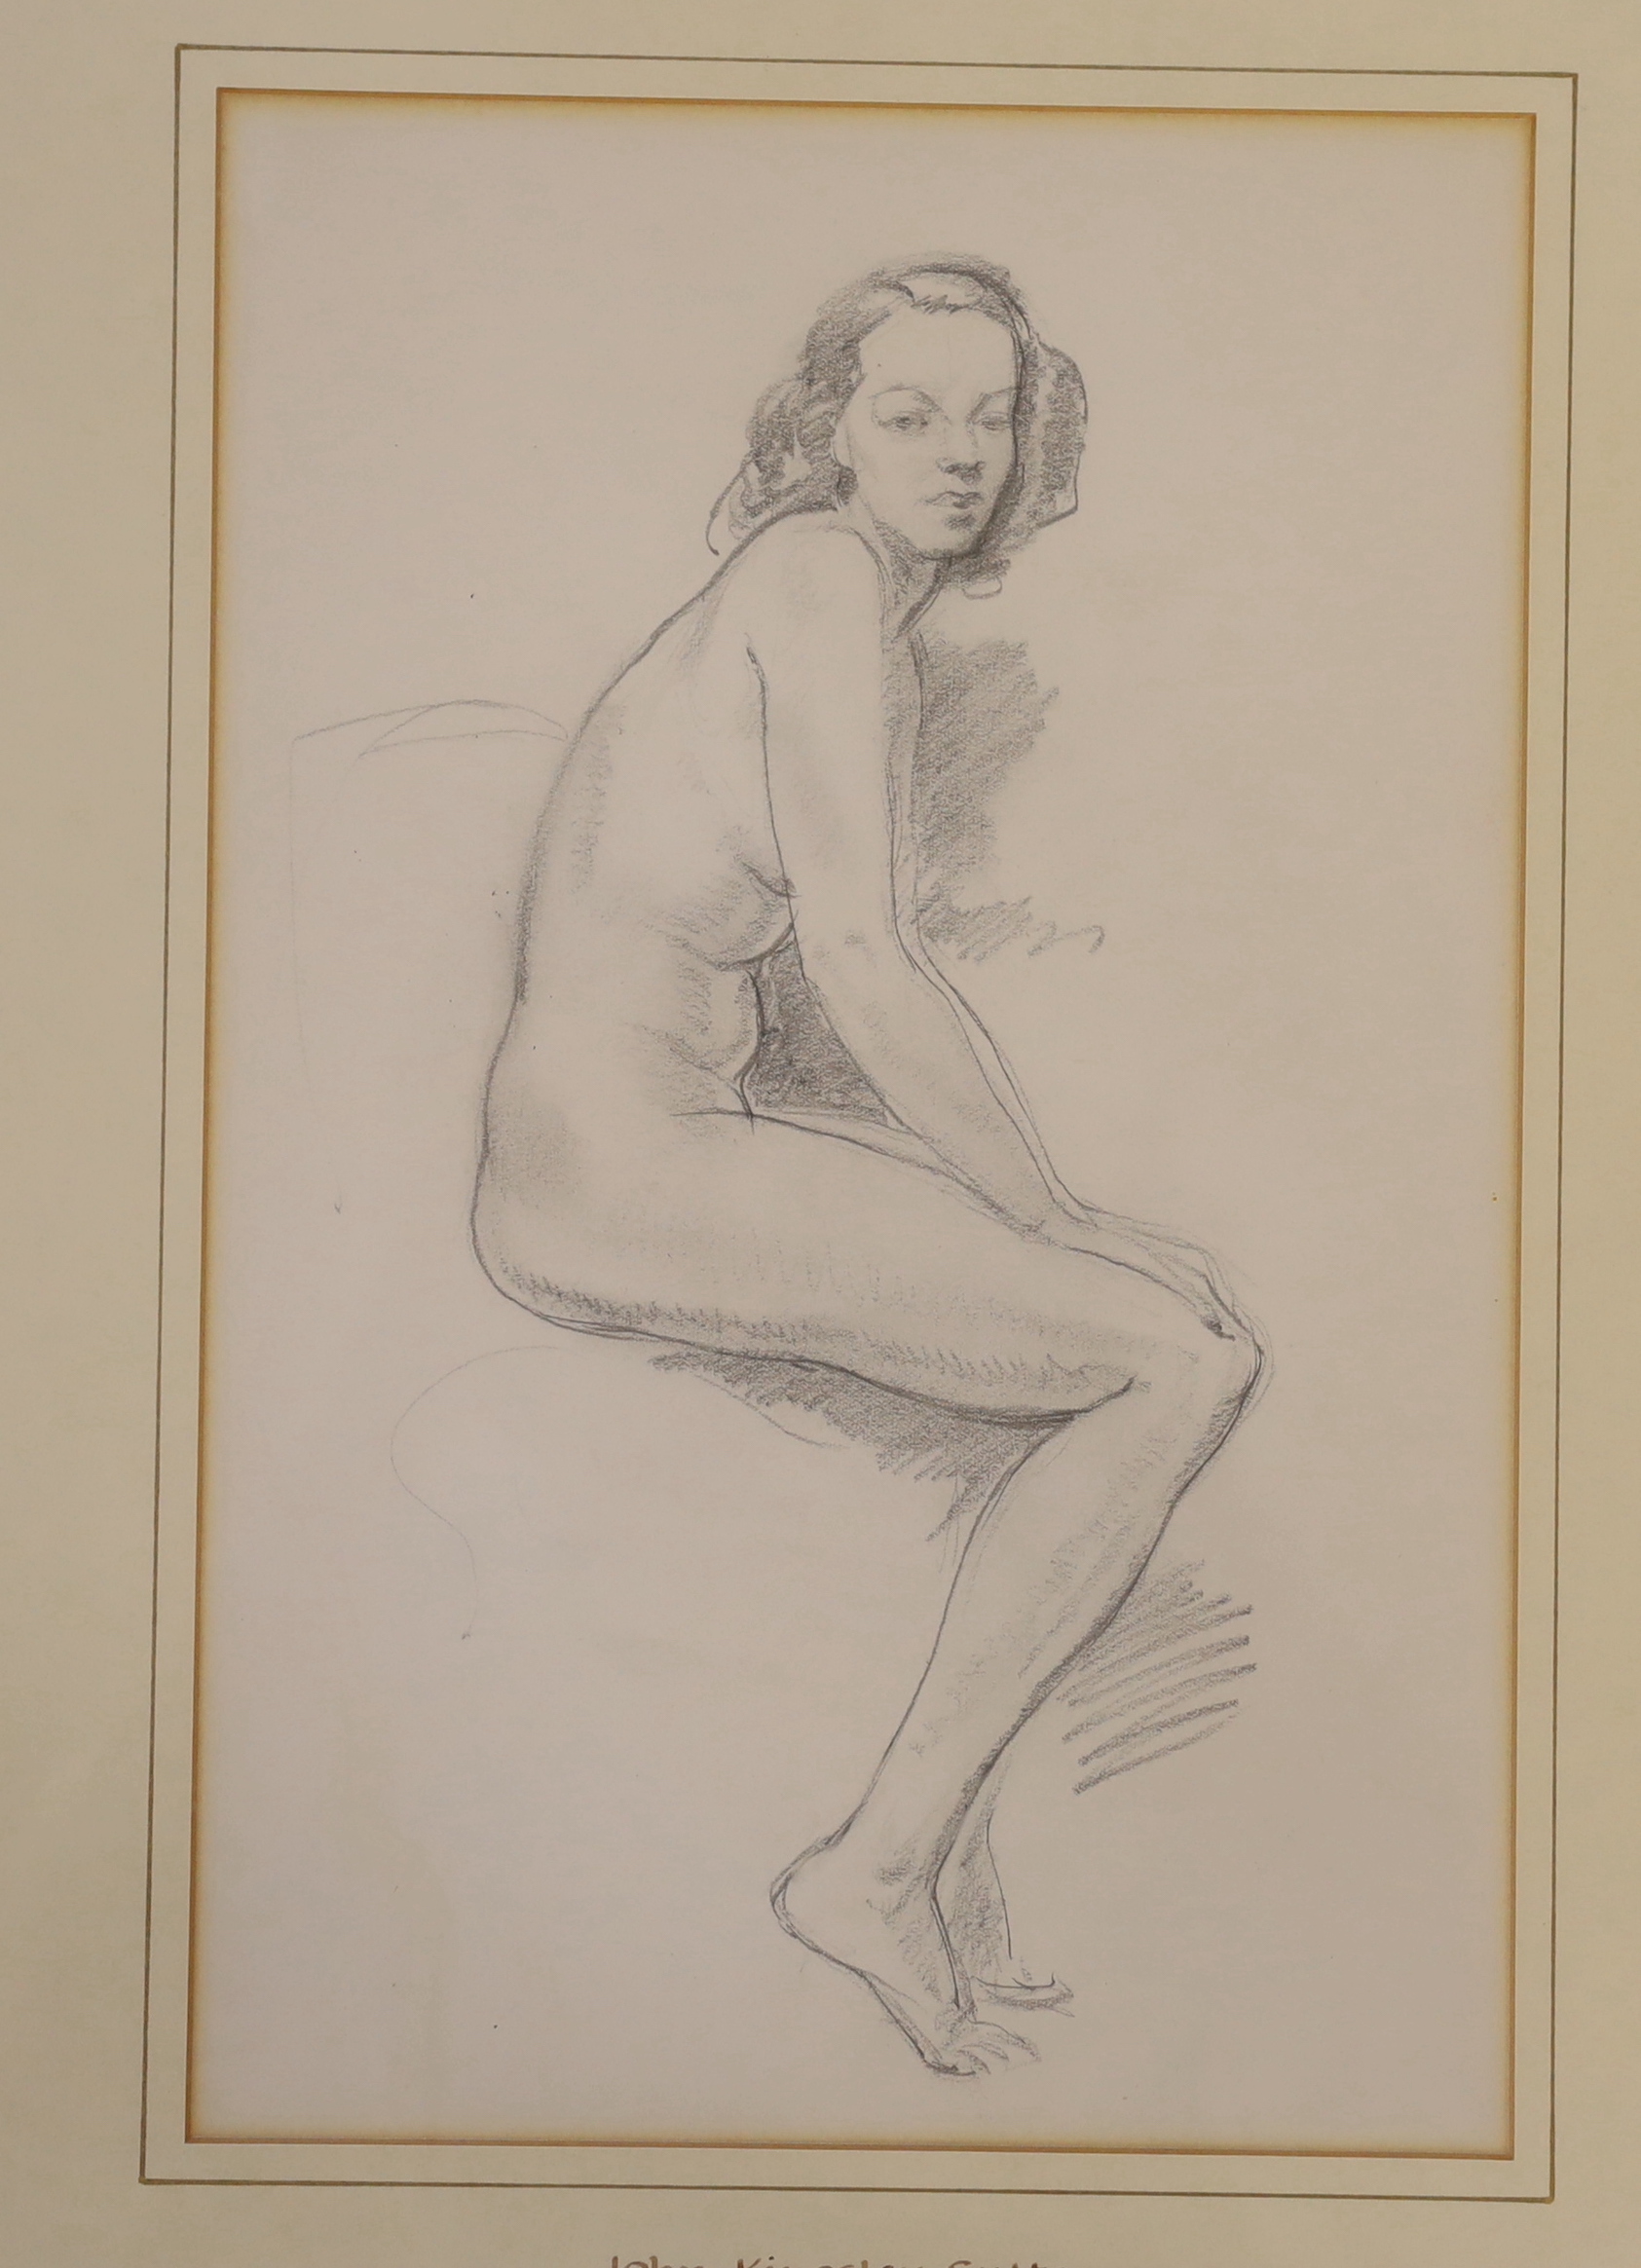 John Kingsley Sutton (1907-1976), two pencil sketches, Nude ladies, inscribed to the mount, largest 34 x 21cm